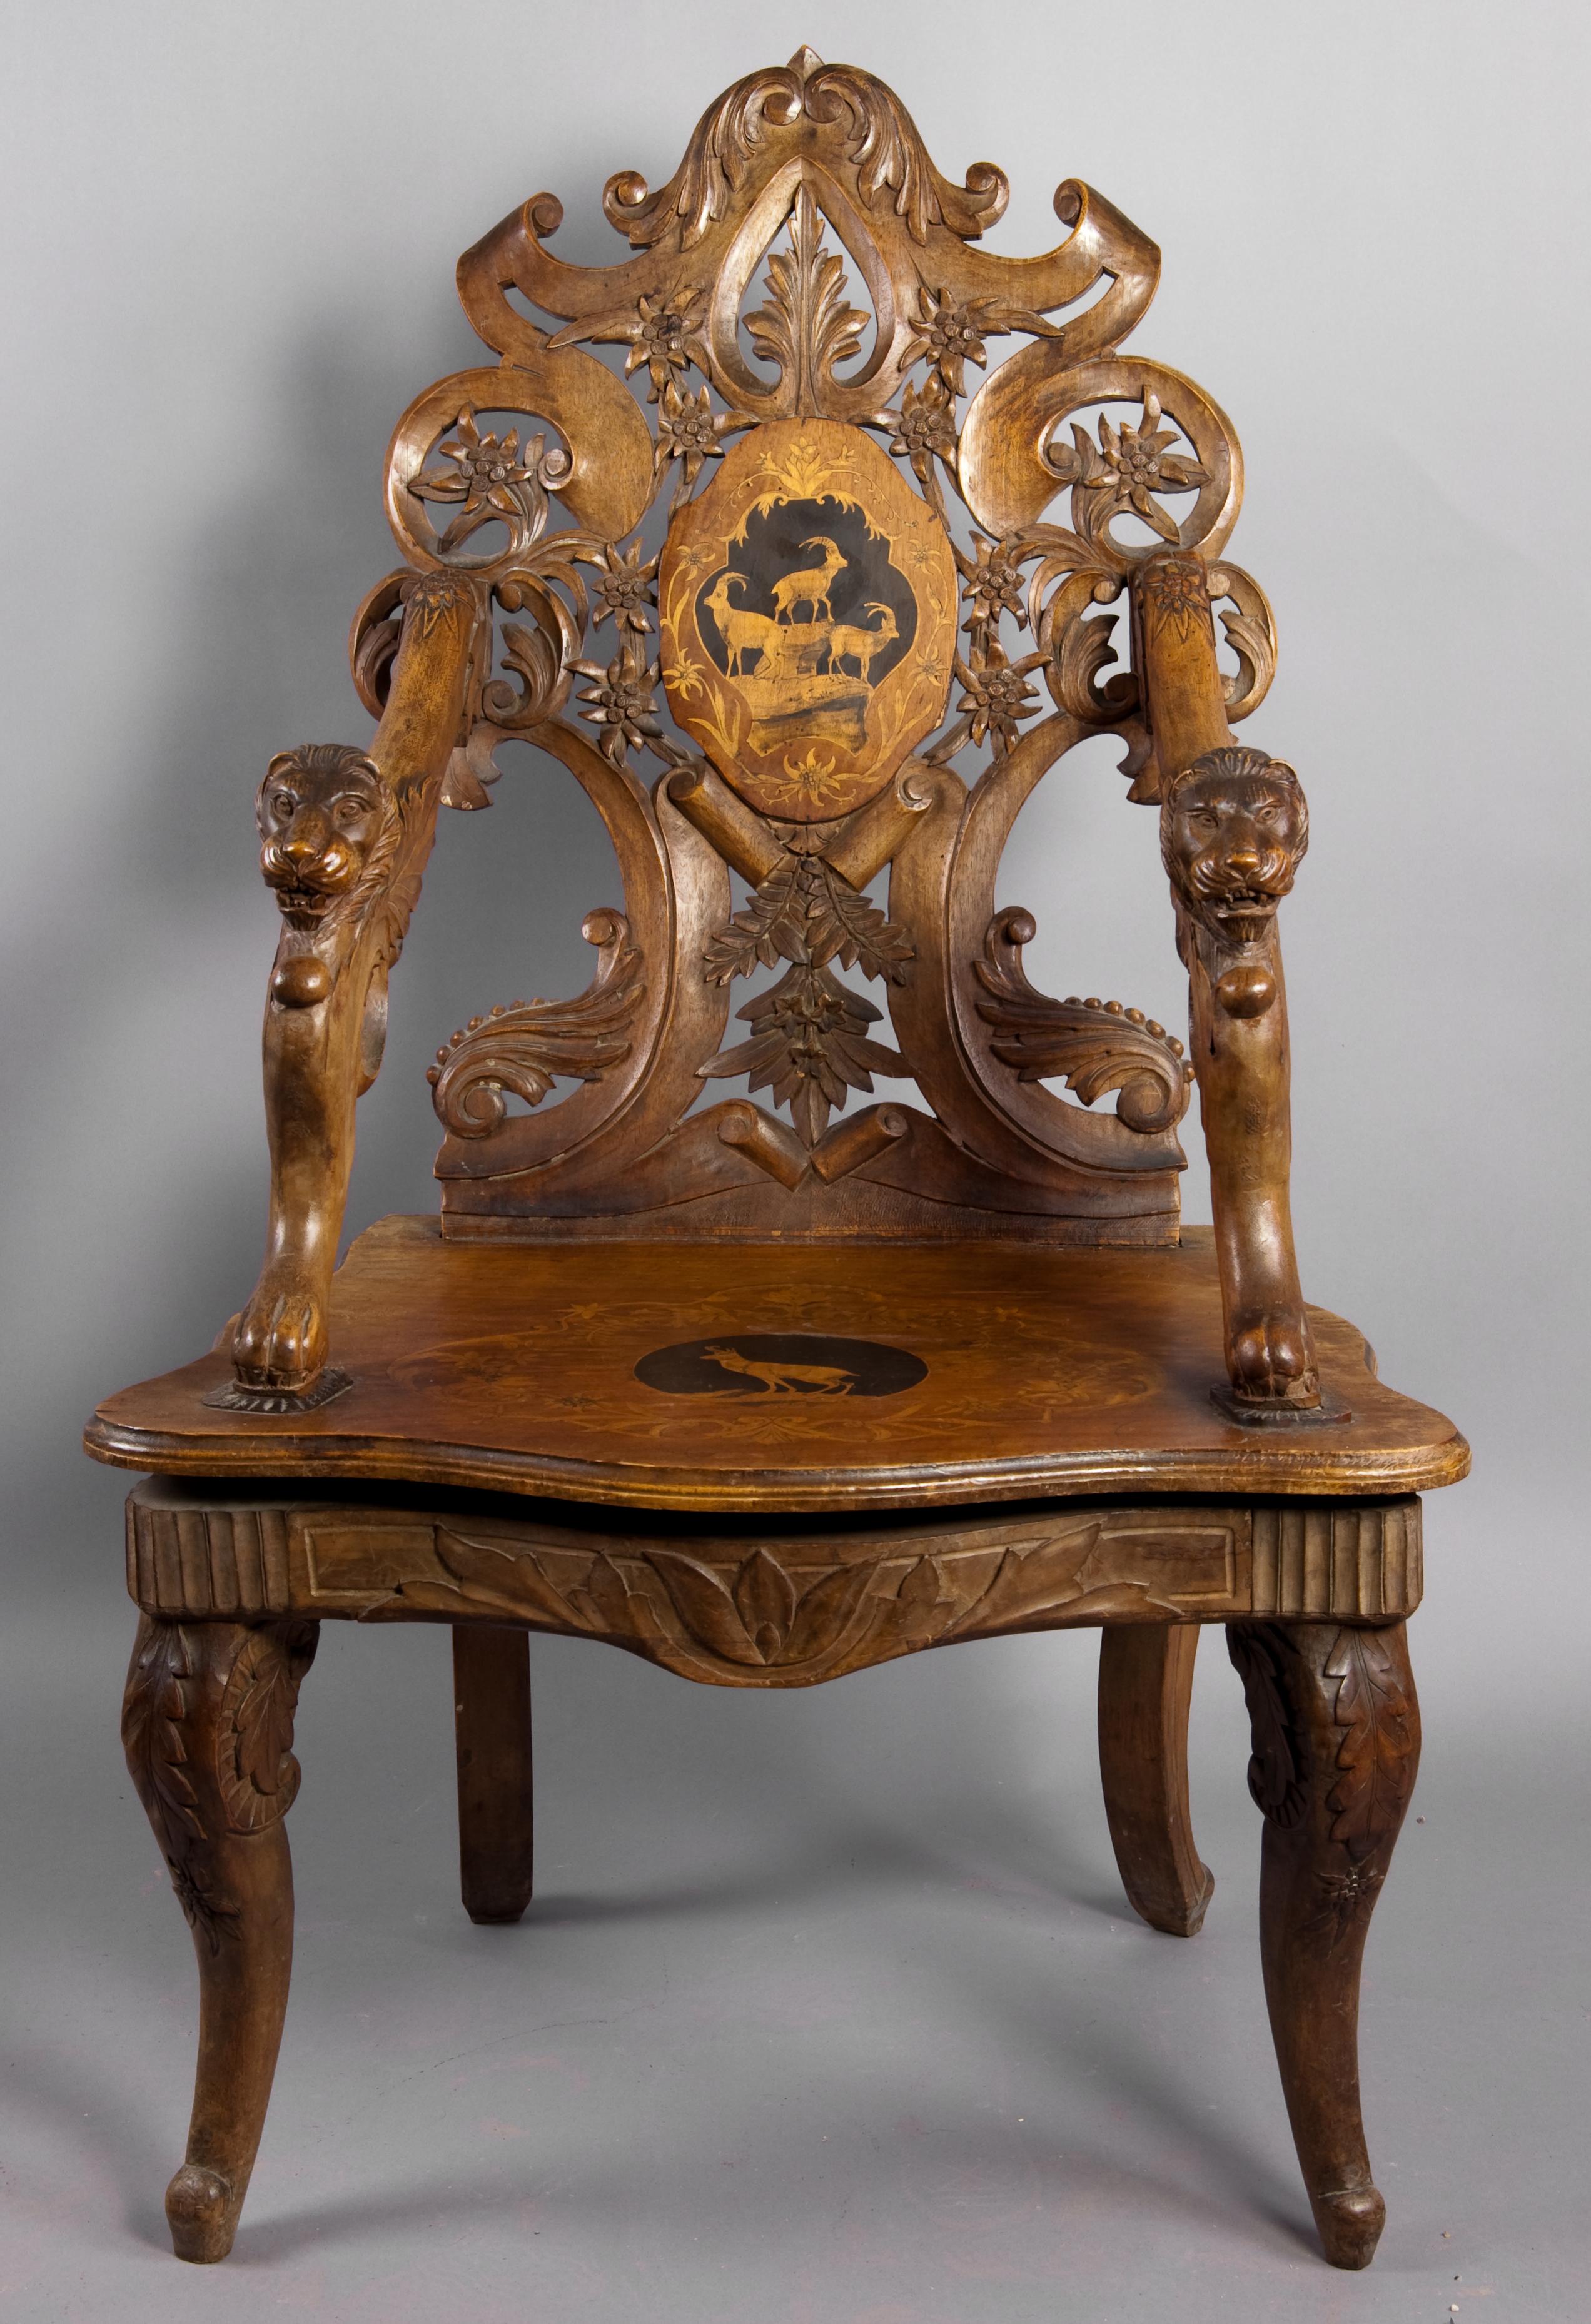 A wonderful carved walnut armchair or throne with finely inlaid seat and back. Superb carved edelweiss and floral ornaments. Lion heads and paws at the base of the arms. Tilt-seat, inside a musical clock. Executed, circa 1900, swiss brienz. (old